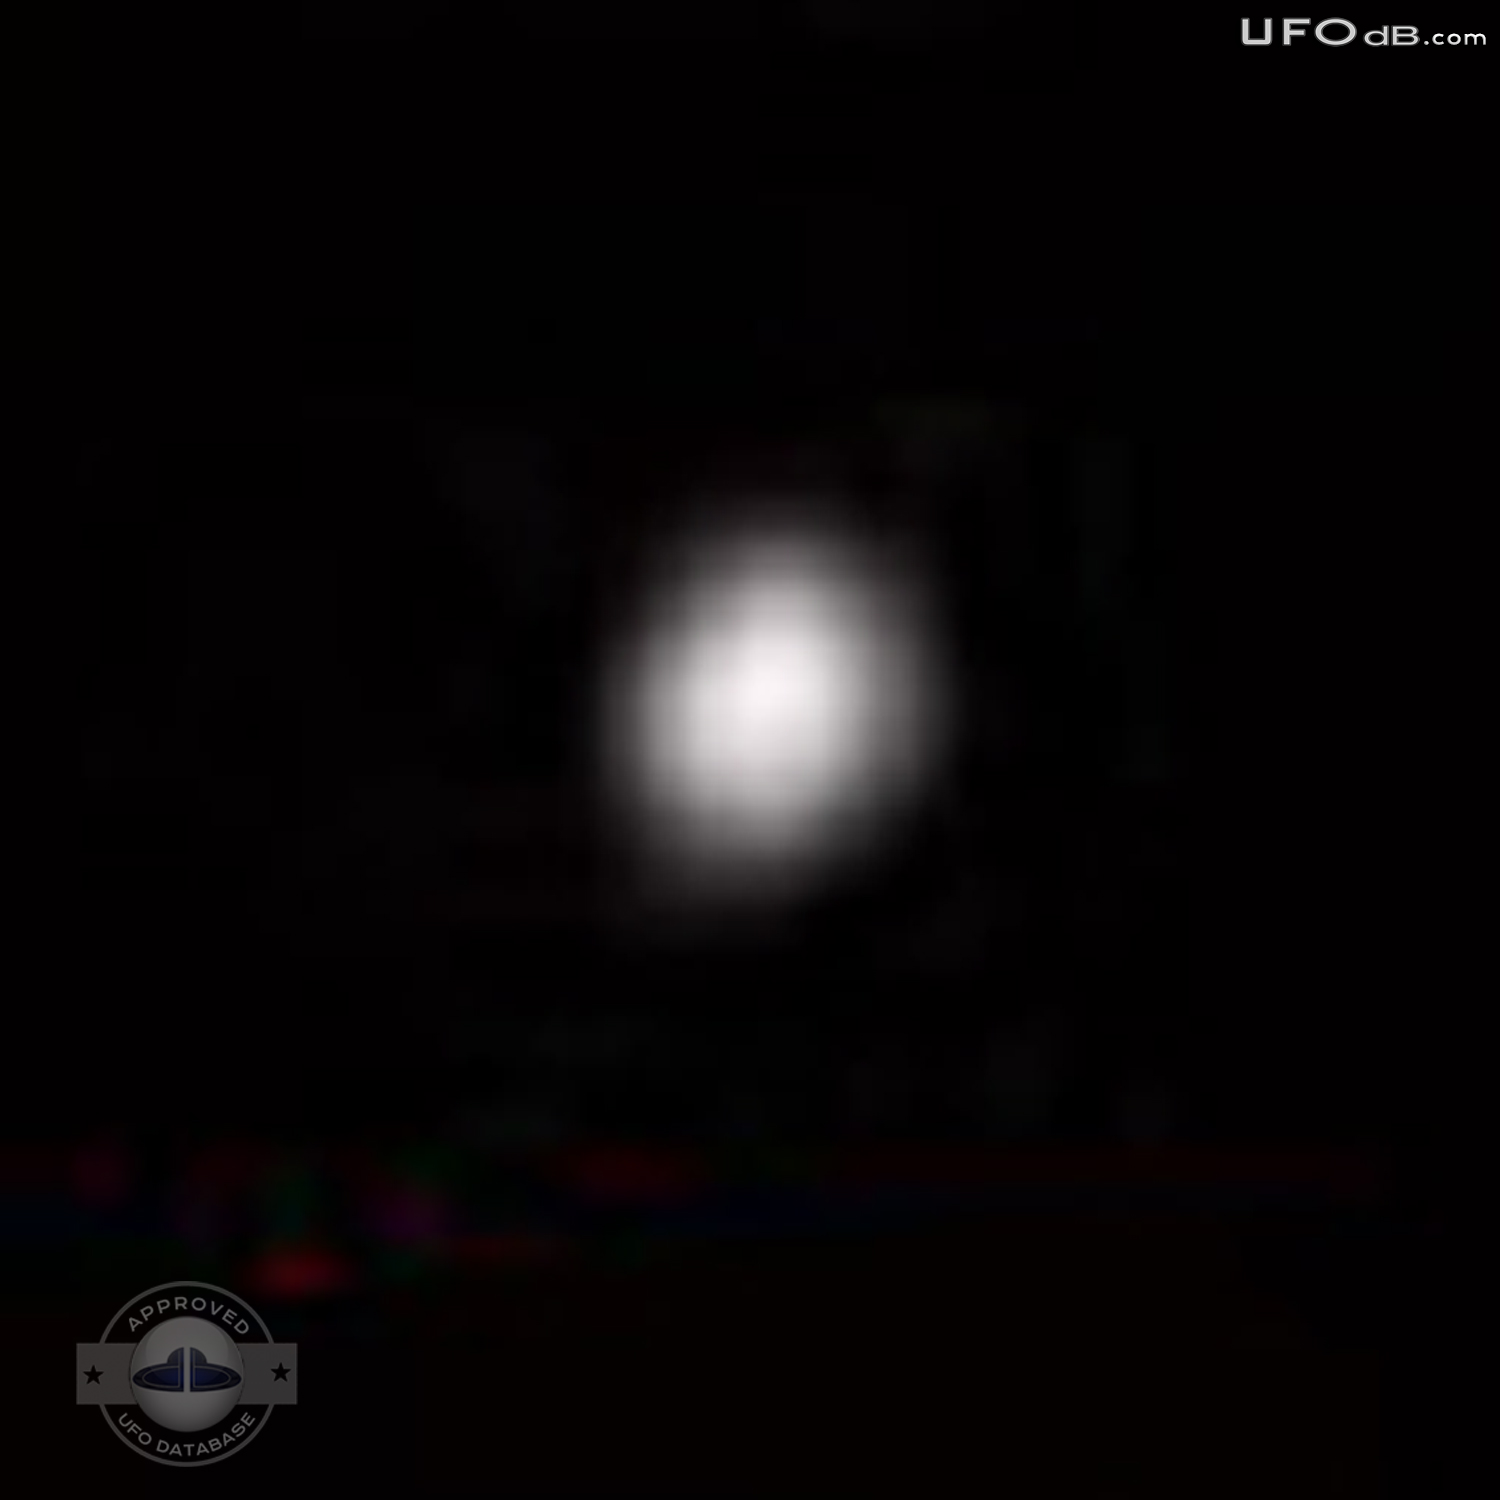 Pulsating Sounds made by Colorful UFOs | Toronto, Canada | May 21 2011 UFO Picture #327-5